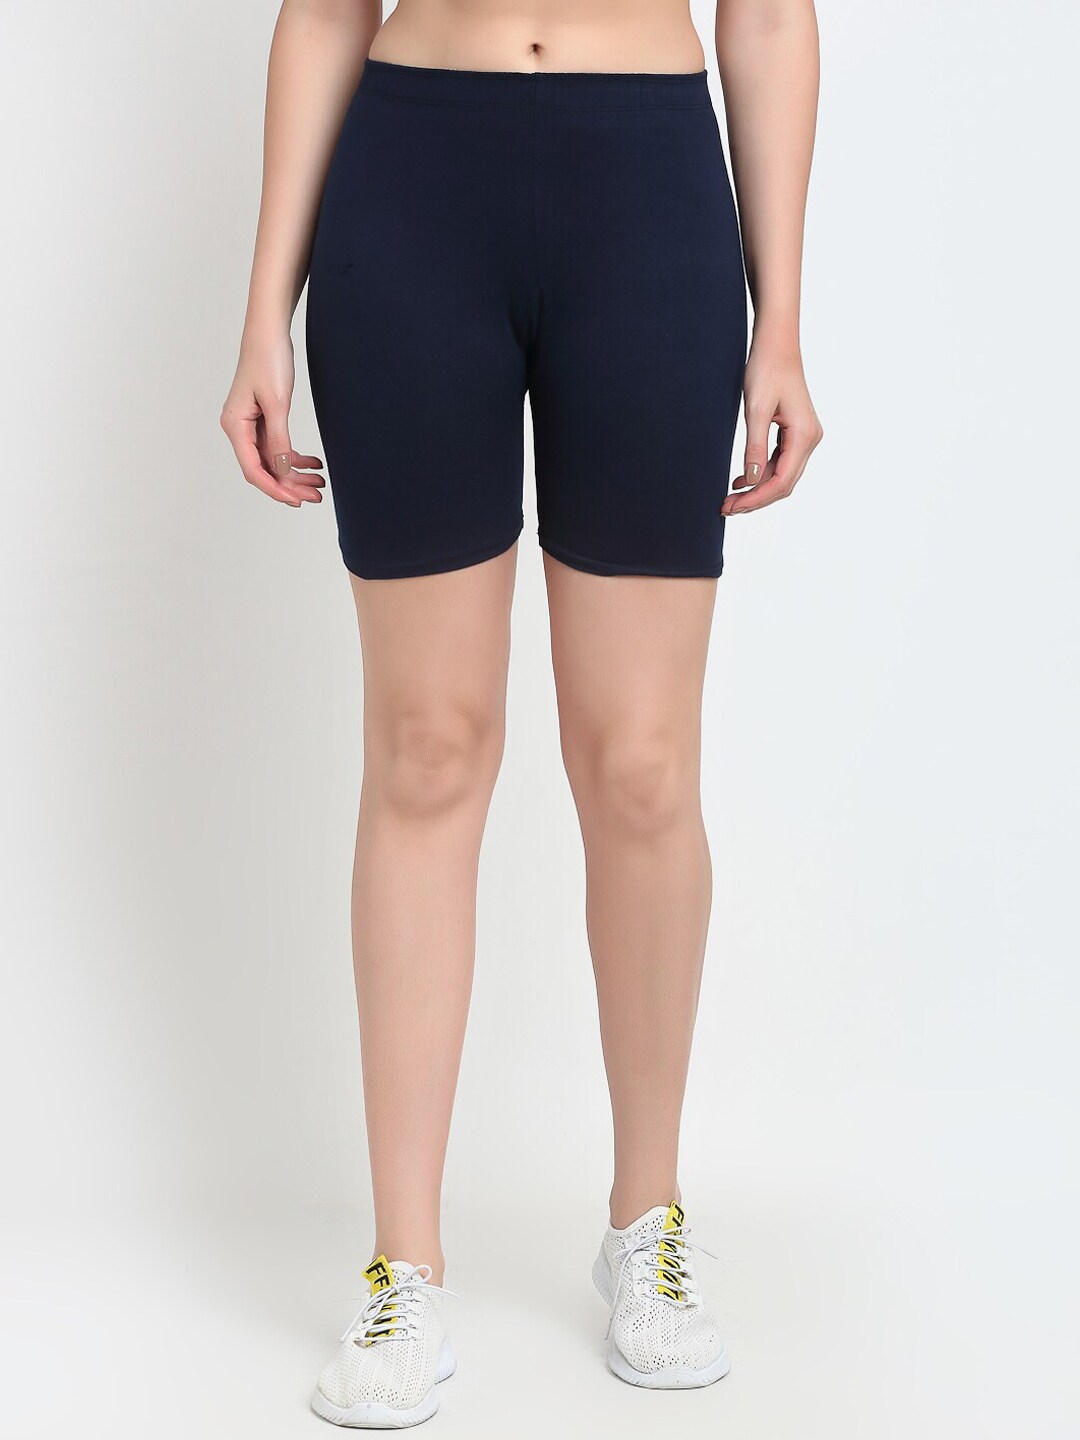 GRACIT Women Navy Blue Cotton Cycling Sports Shorts Price in India